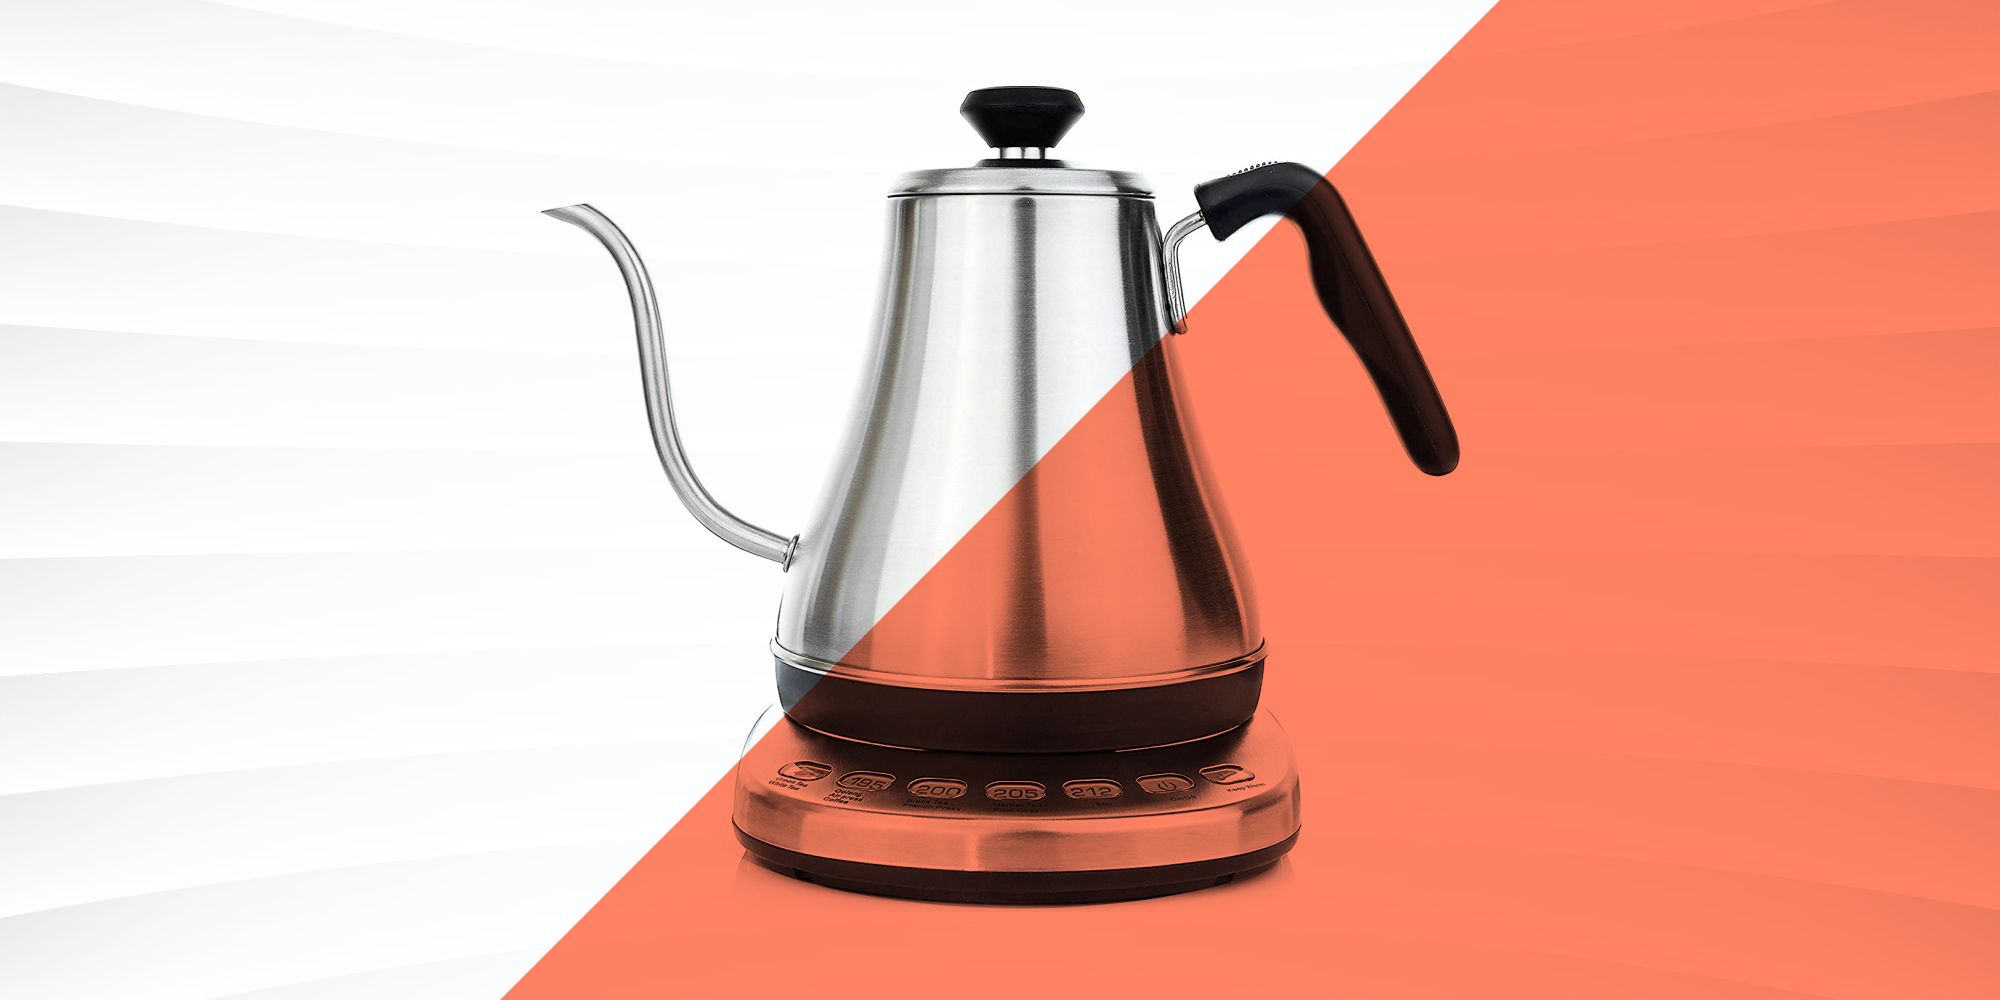 Auto Shut-Off and Boil Dry Protection Tech Dezin Electric Kettle Glass Water Heater Boiler 1.5L Stainless Steel Finish Cordless Tea Kettle with LED Light Fast Heating One Touch Lid Open Button 